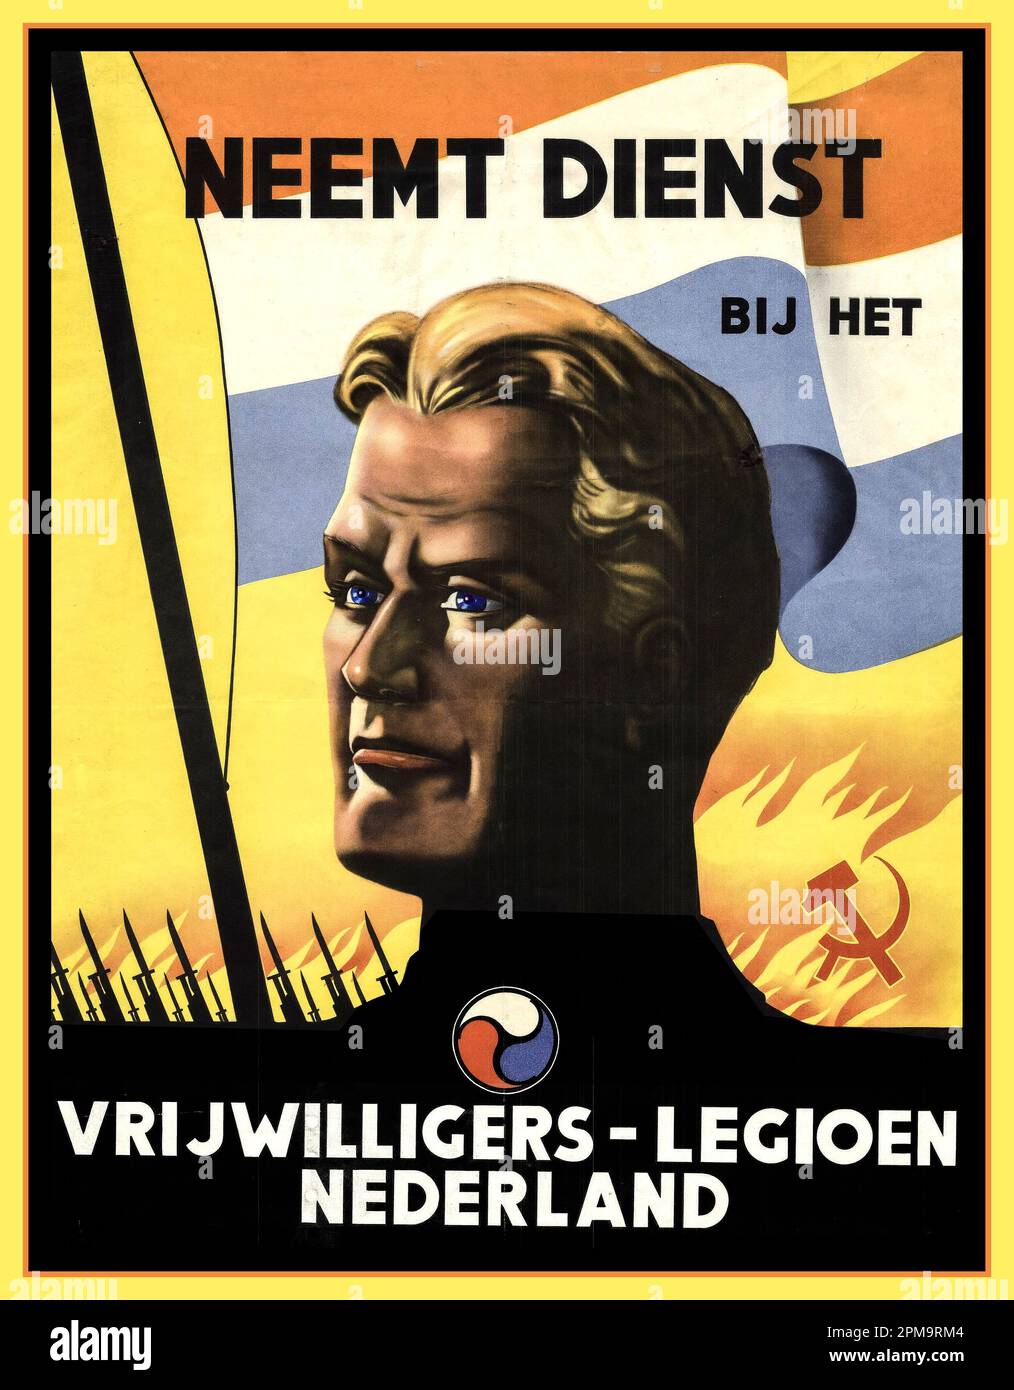 WW2 Dutch Right Wing Nazi friendly recruitment poster featuring a blond blue eyed aryan male 'Enlist in the Volunteer Legion Netherlands A call to join the Volunteer Legion Netherlands: 'Enlist in the Volunteer Legion Netherlands Holland Stock Photo